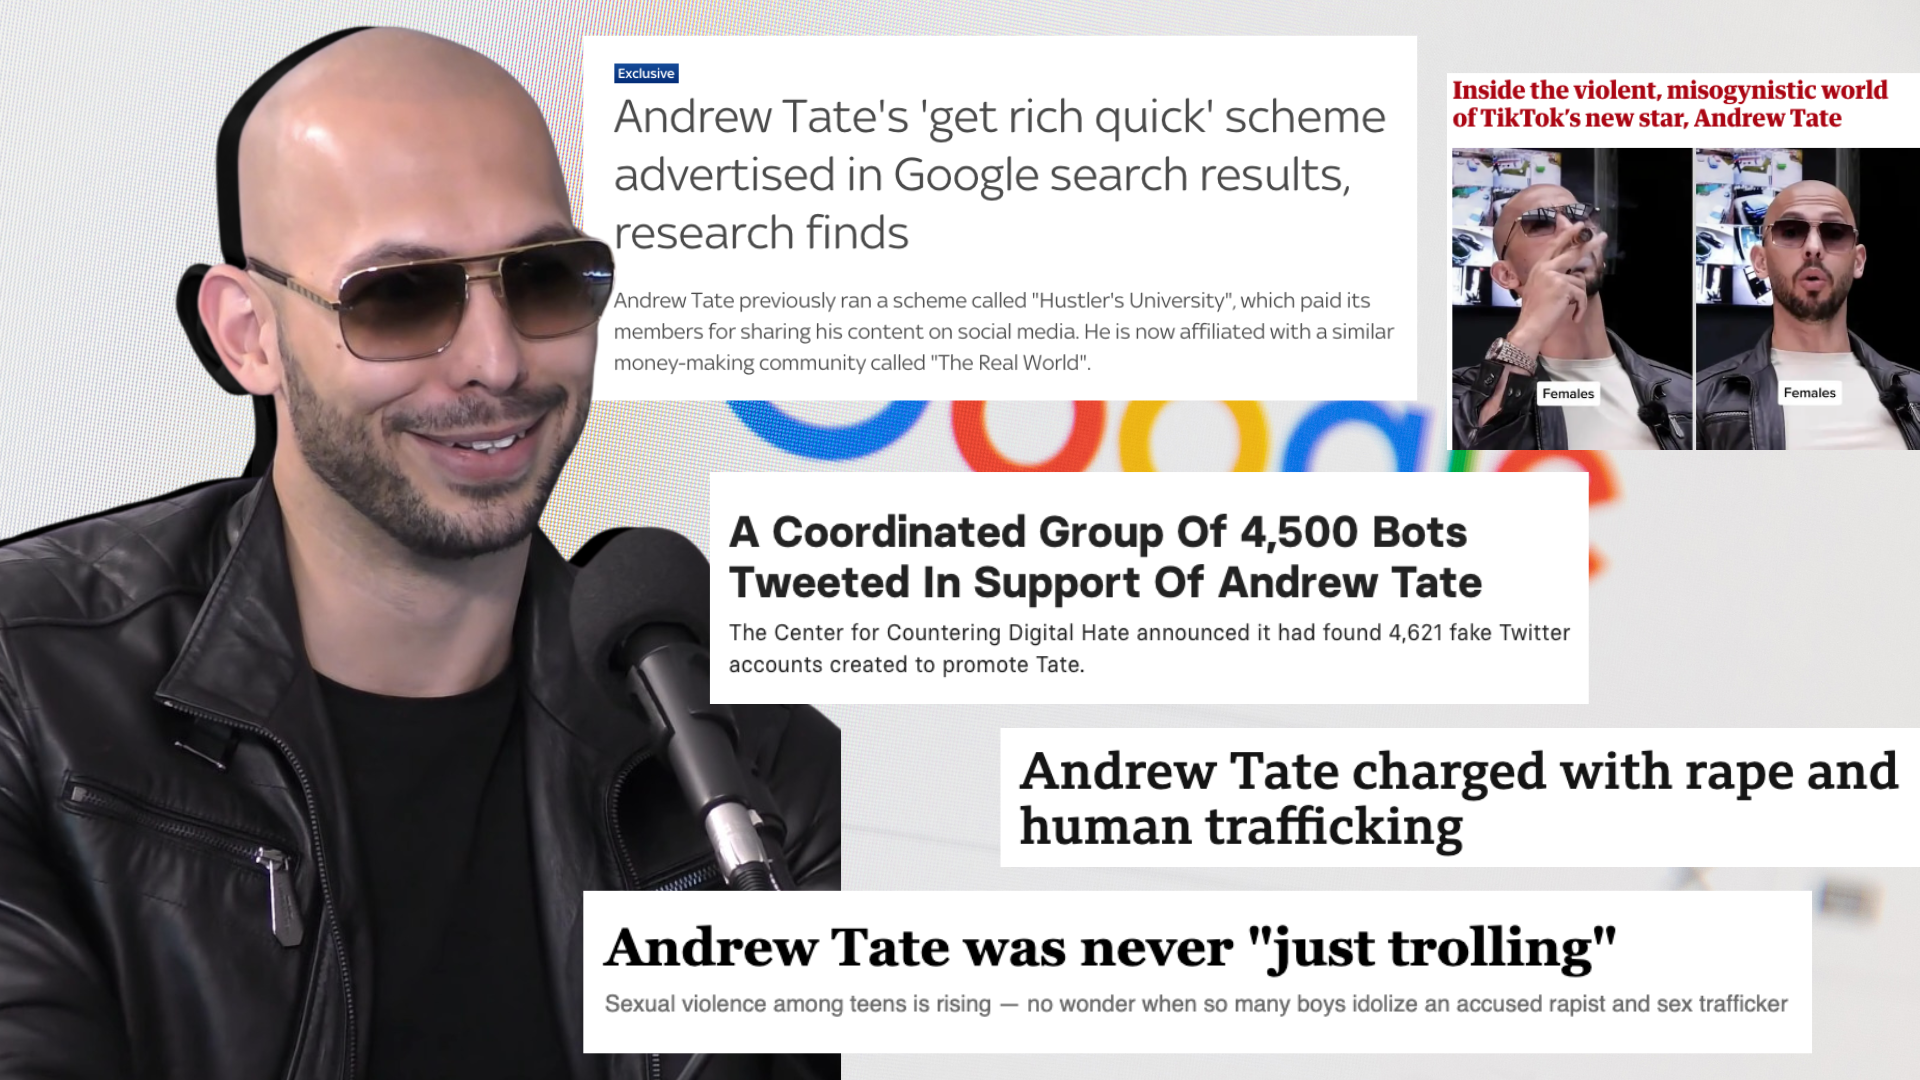 Who are Andrew Tate's parents?